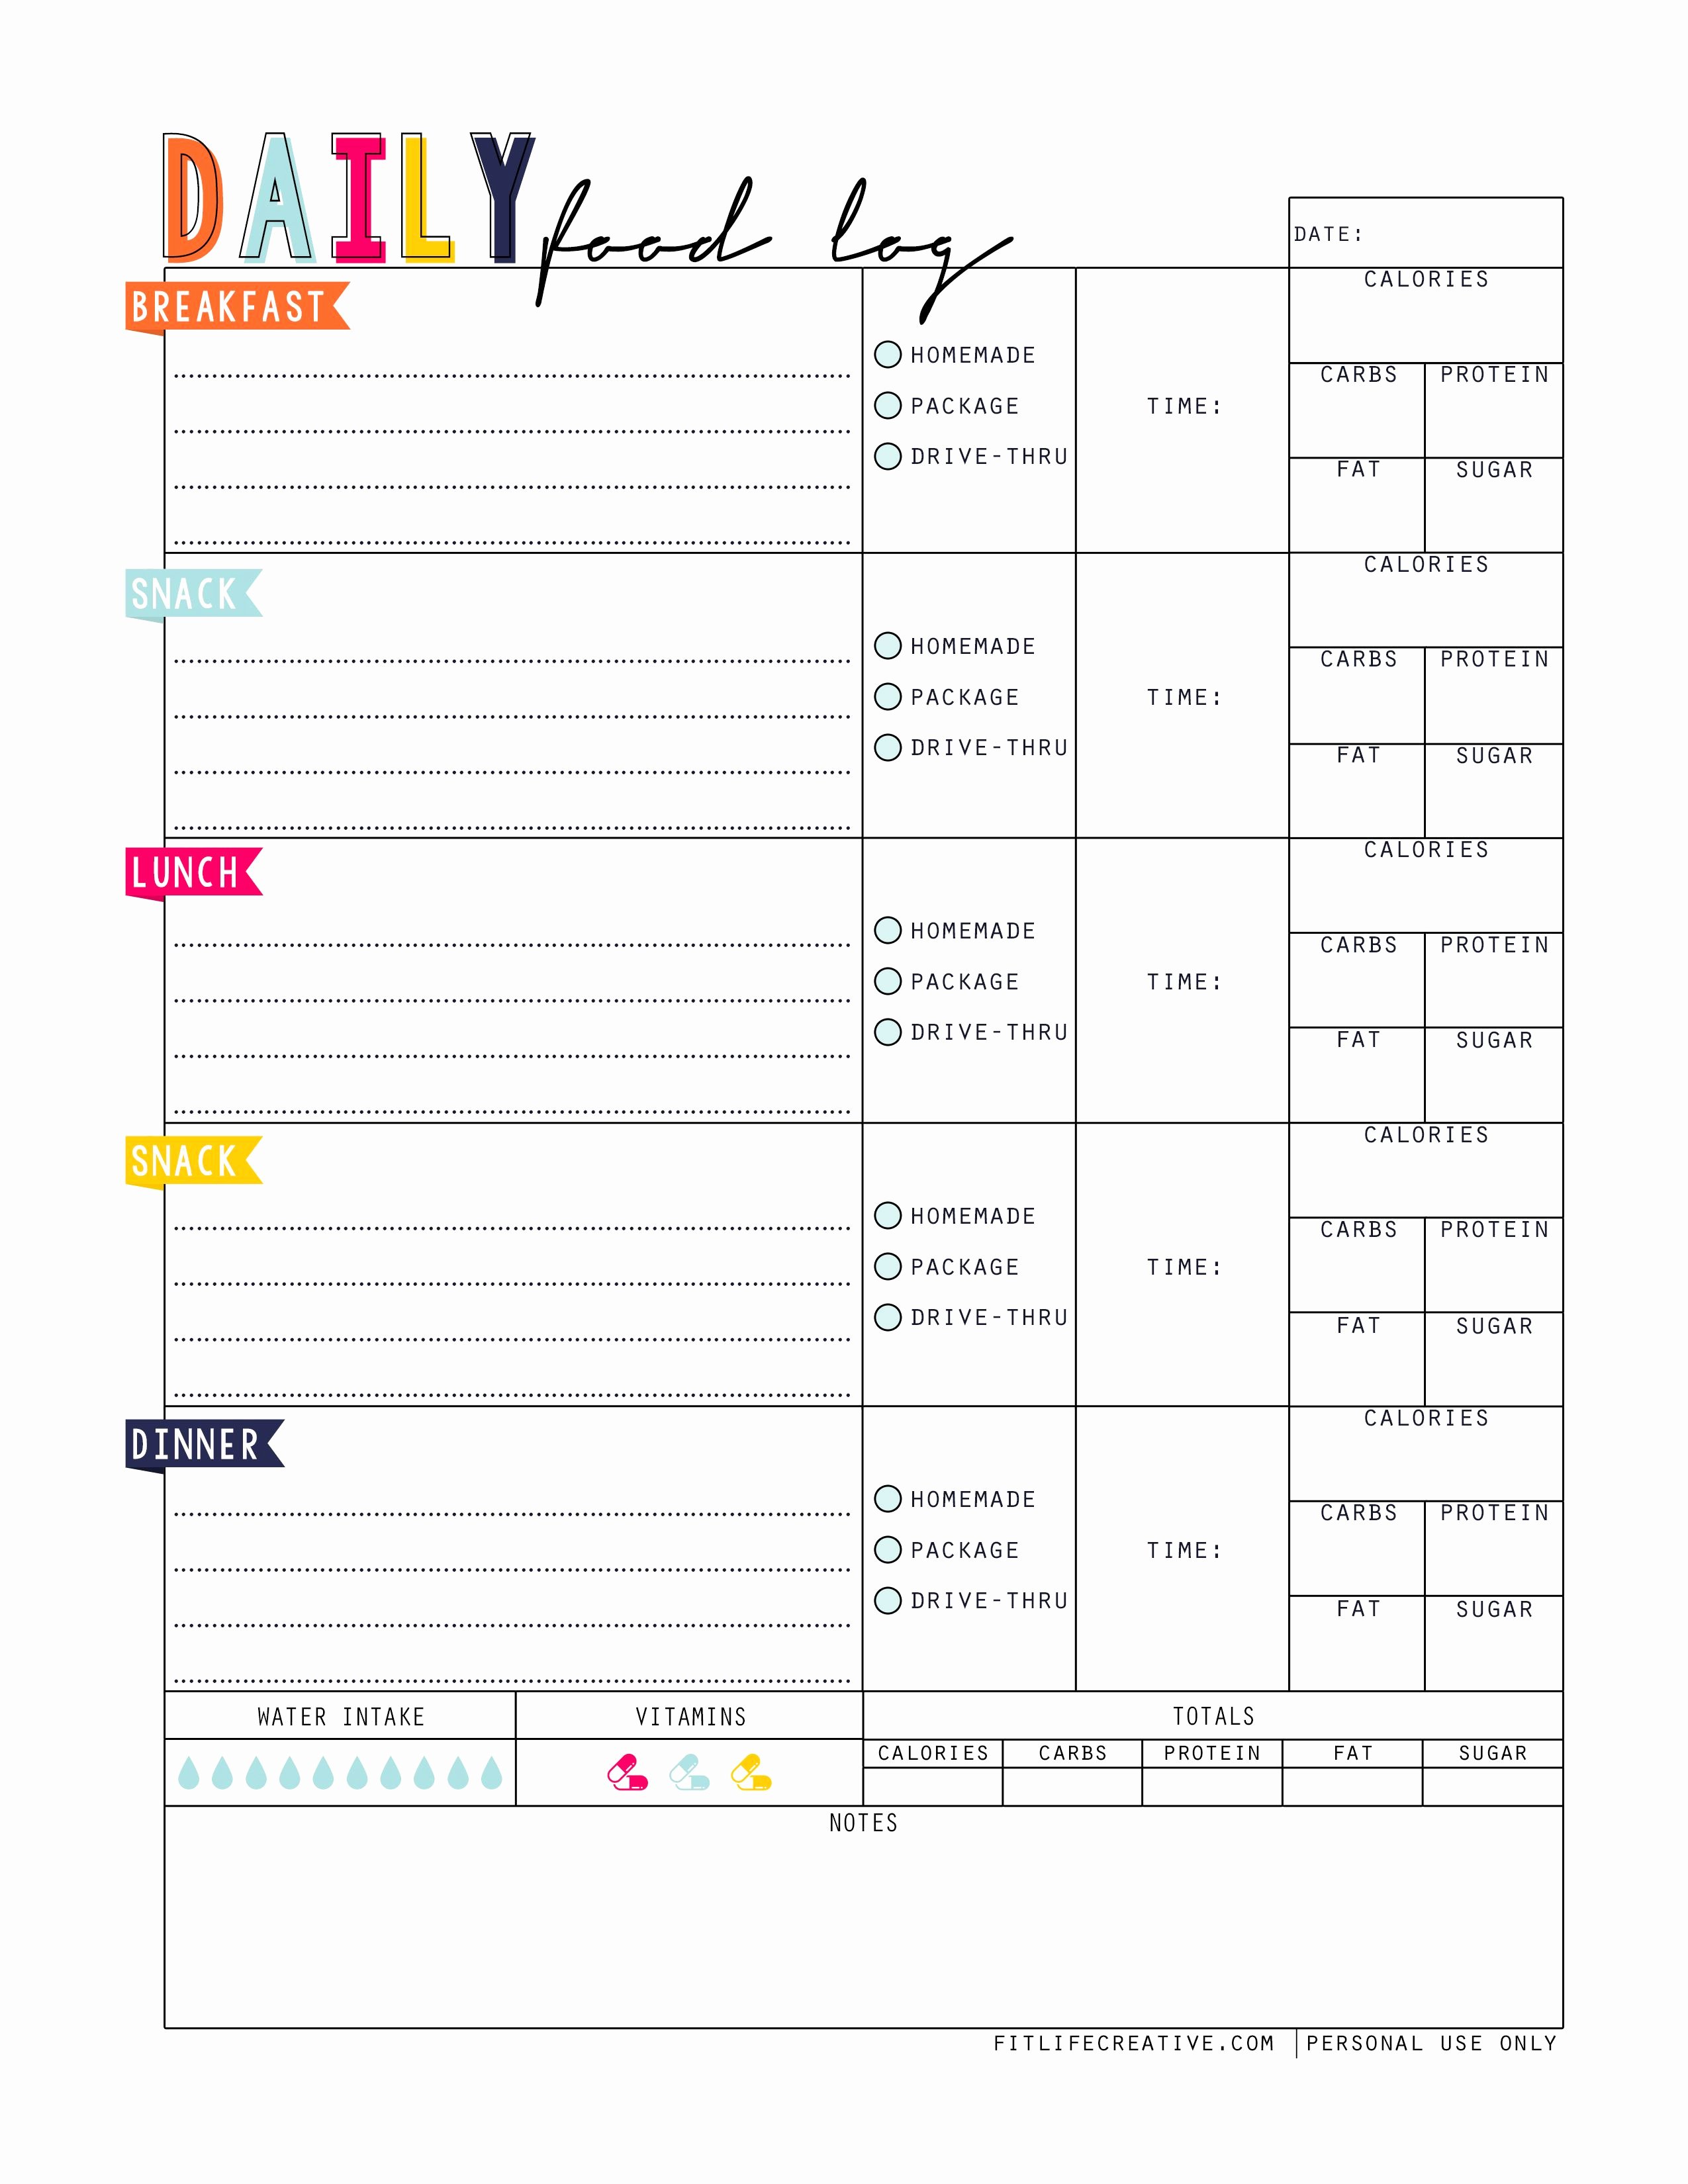 Free Printable Food Journal Unique Daily Food Log Printable A Successful Health and Fitness